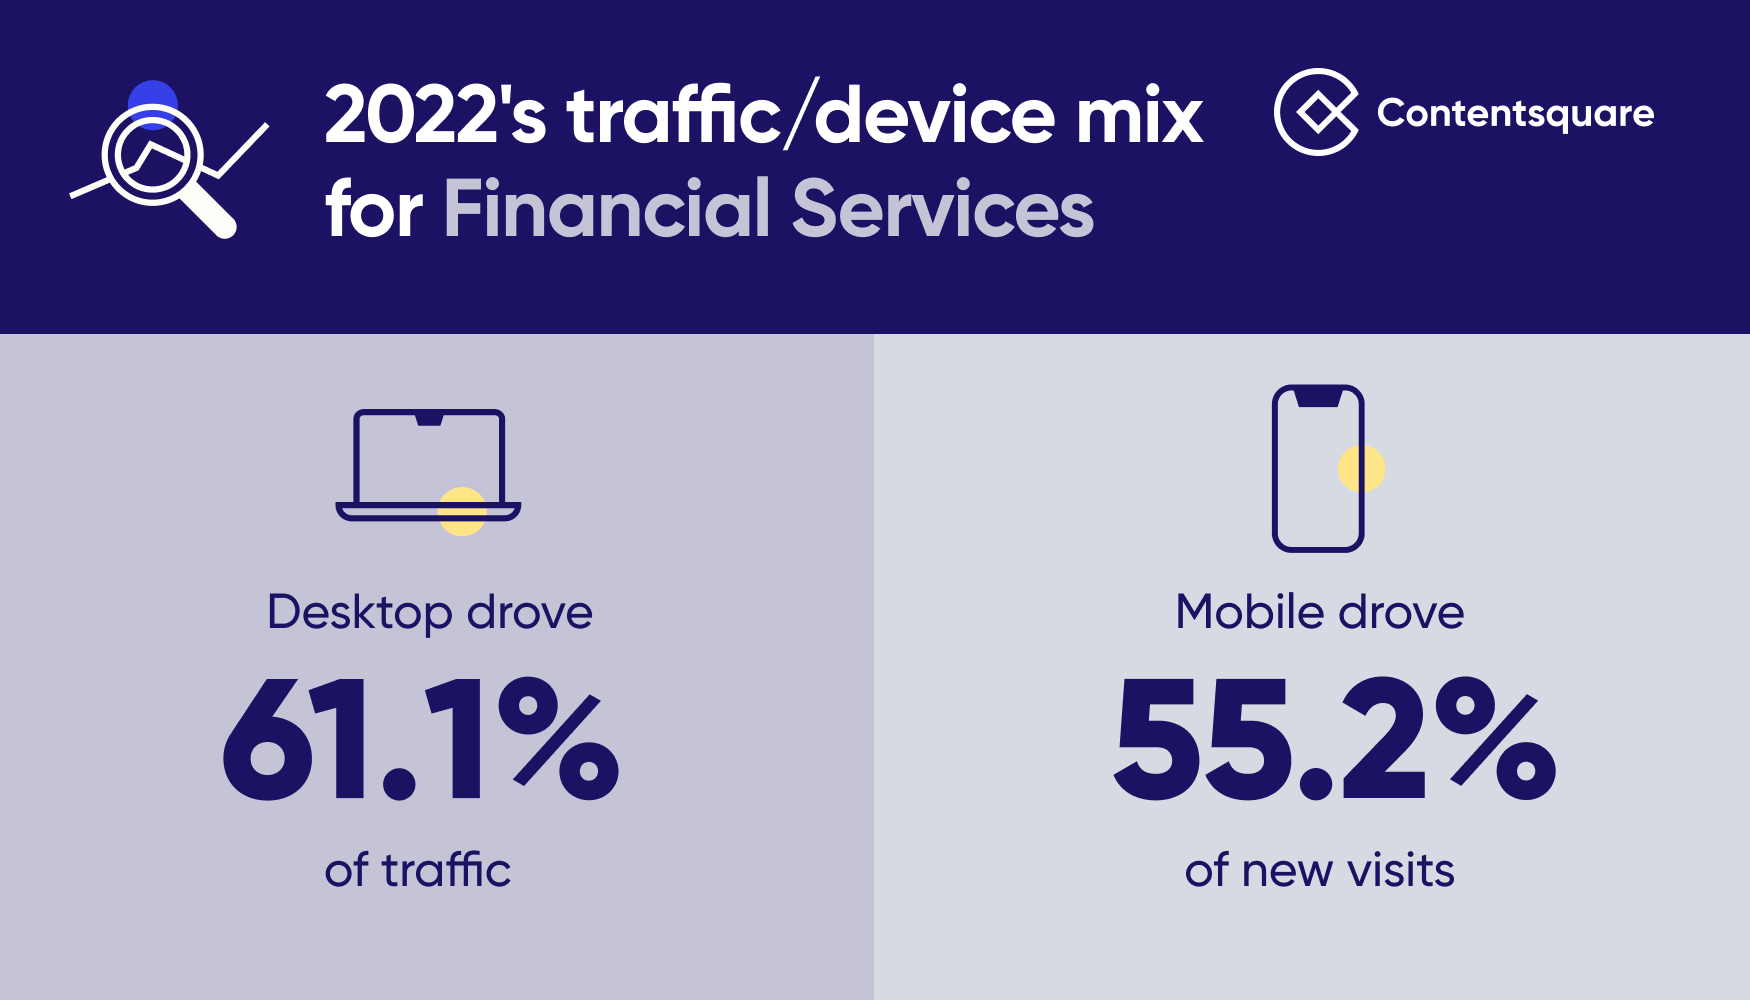 Traffic/device mix for FinServ should help shape customer retention strategies for banks and insurers